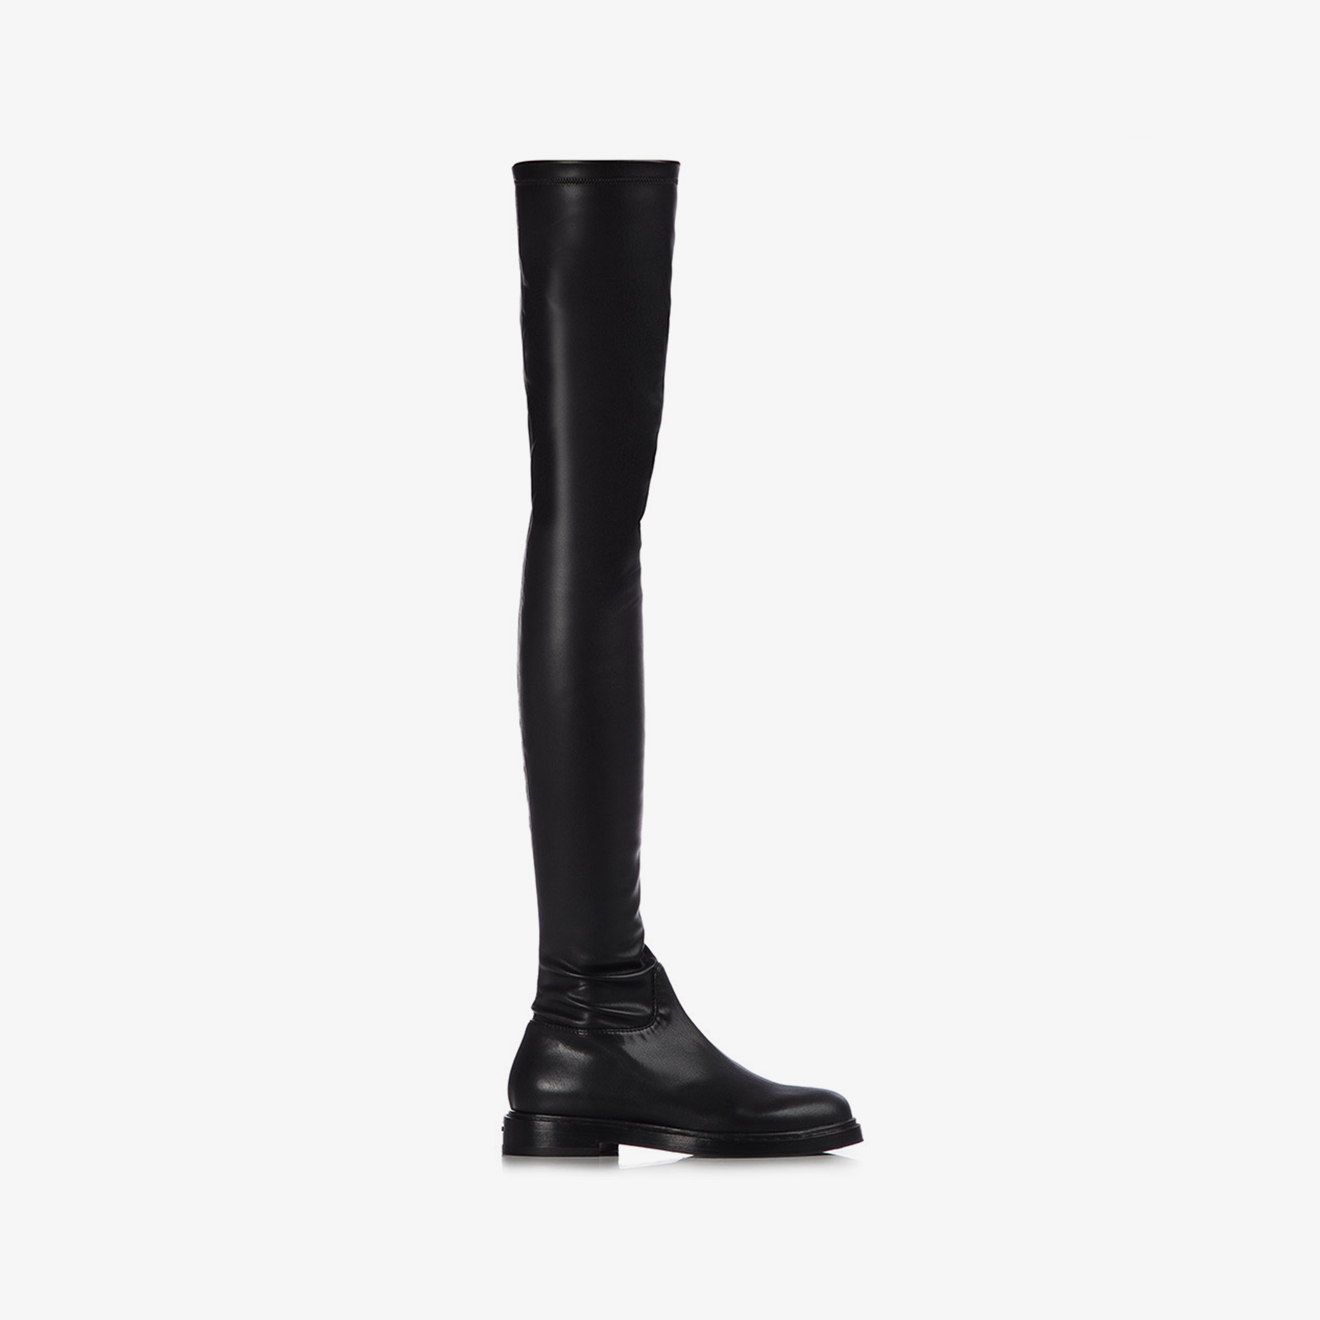 SAMA THIGH-HIGH BOOT - Le Silla official outlet